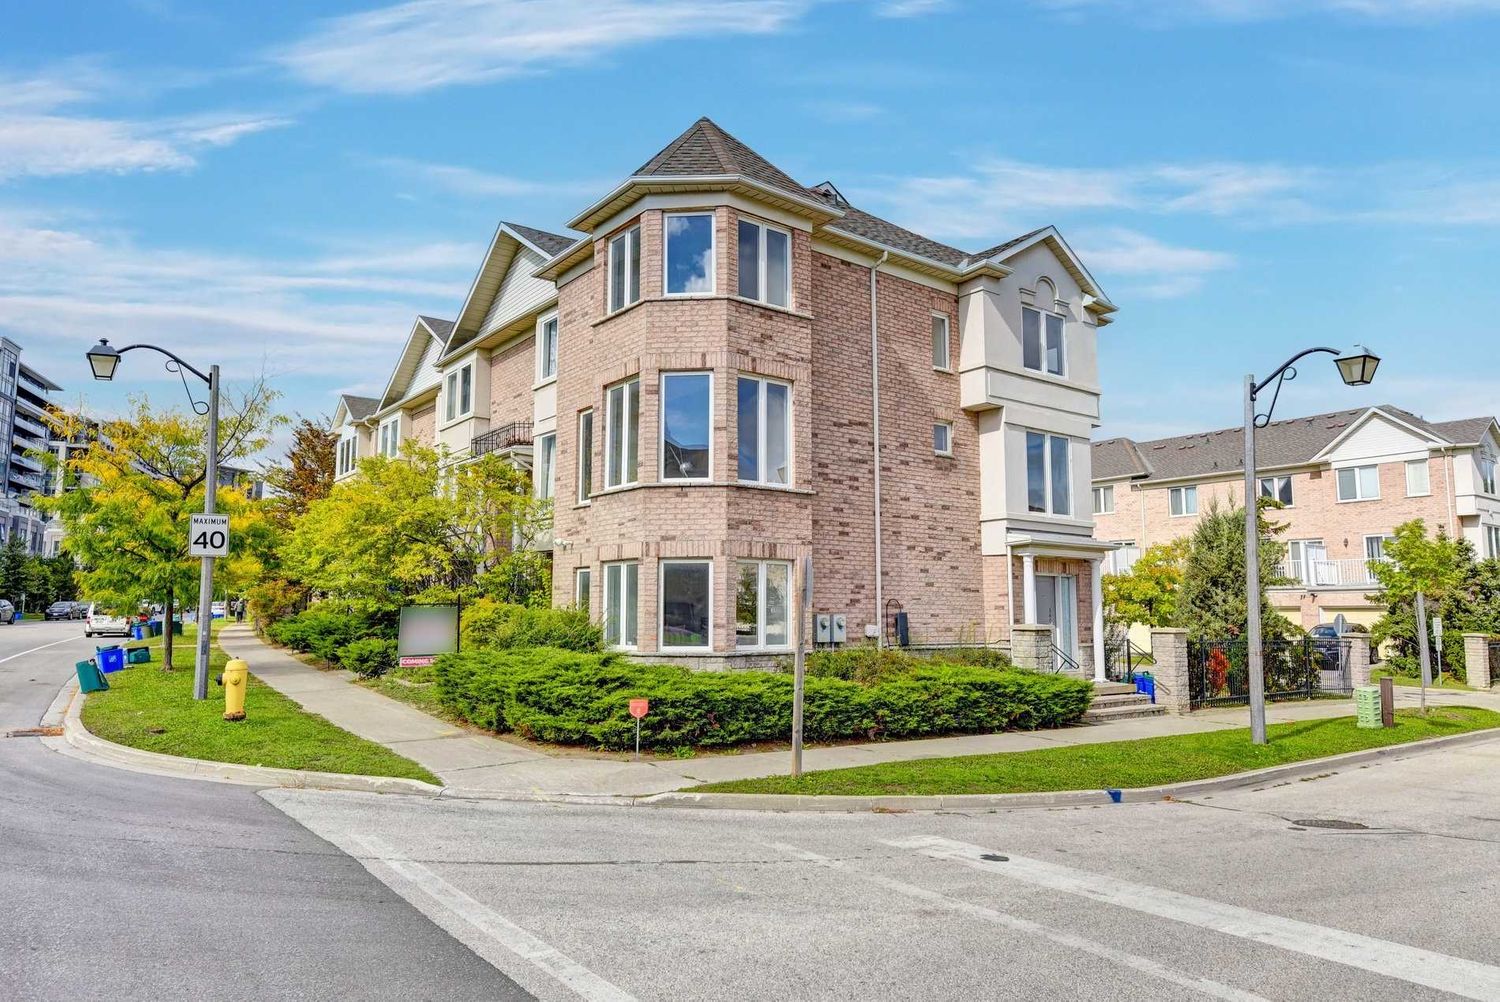 300-376 South Park Road. South Park & Leitchcroft Townhomes is located in  Markham, Toronto - image #1 of 3